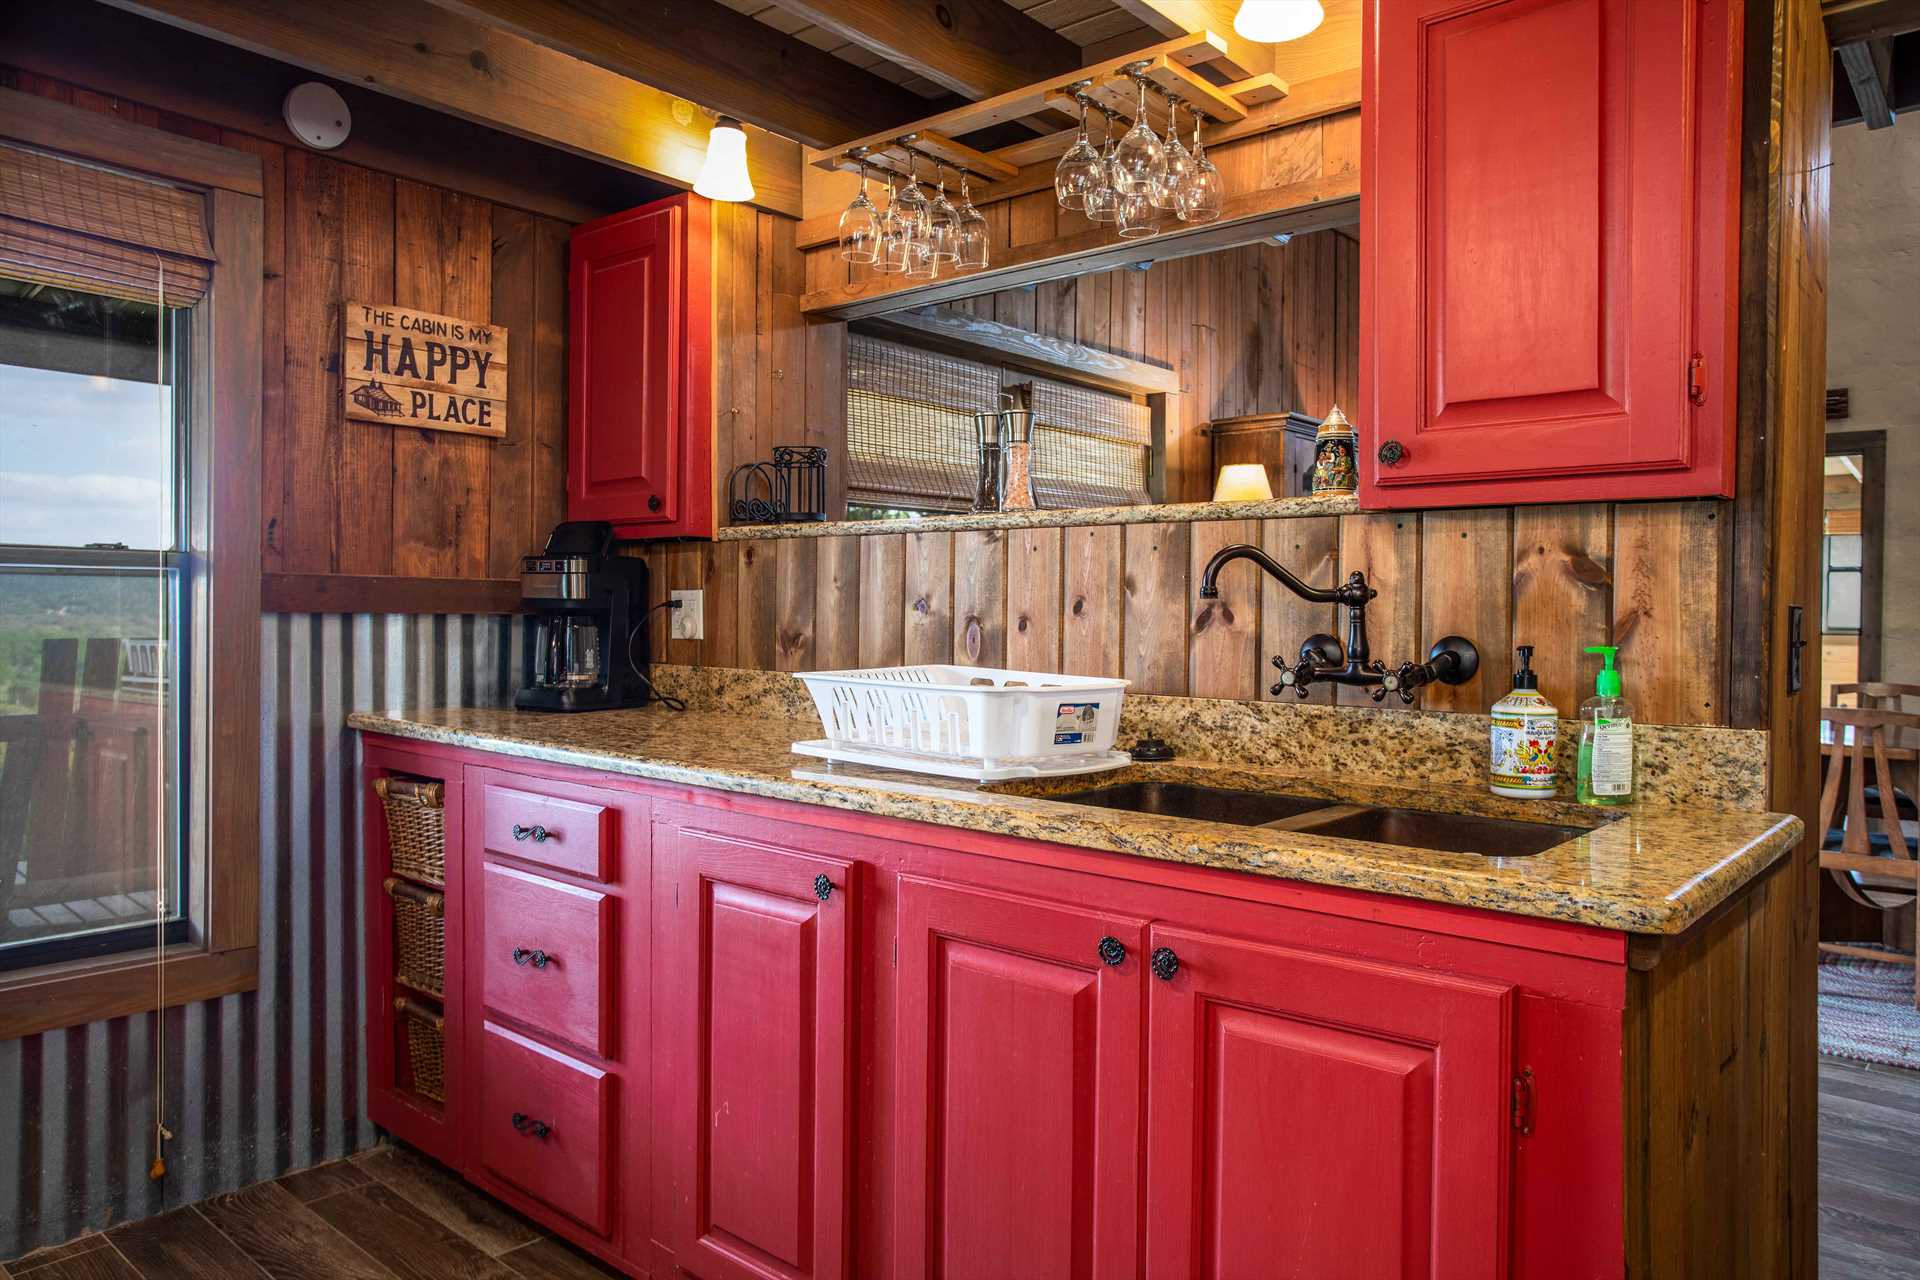                                                 This colorful county kitchen comes complete with all the cooking and serving ware, utensils, and glasses you'll need for your stay.